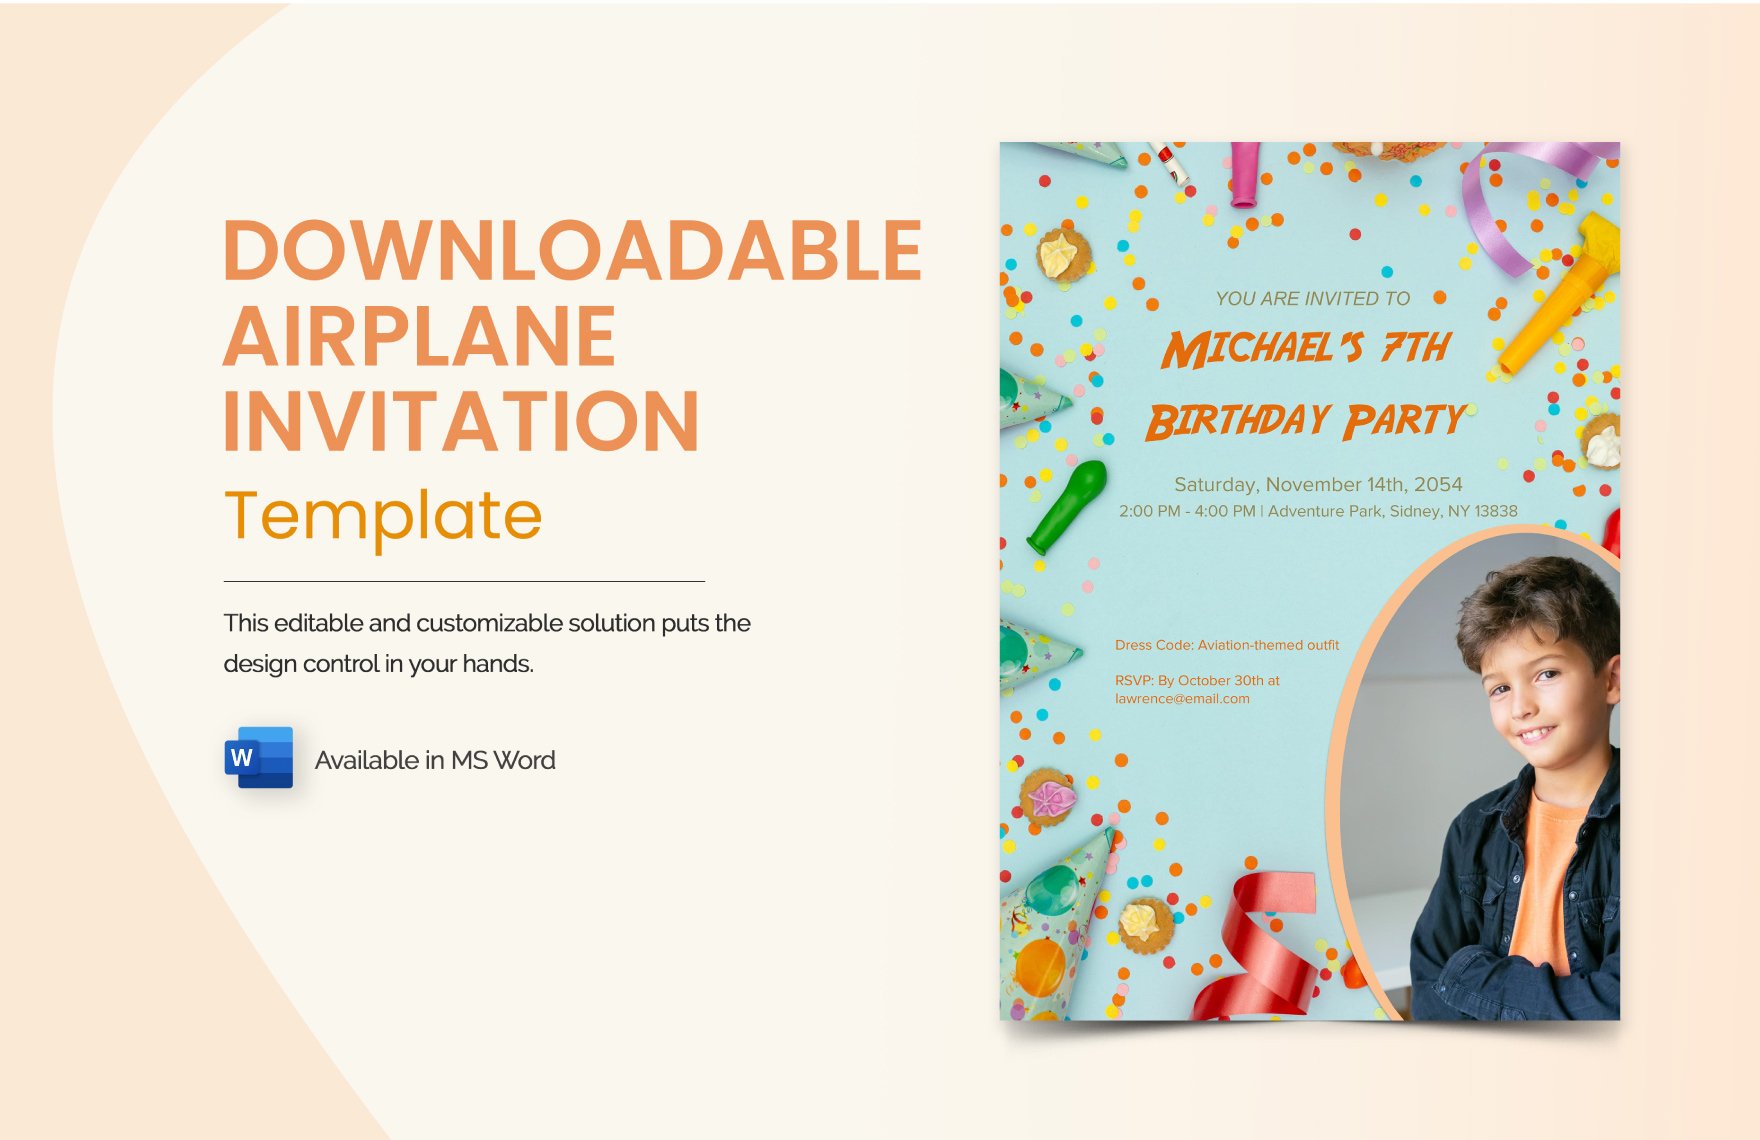 Free Downloadable Airplane Invitation Template in Word, Google Docs, PDF